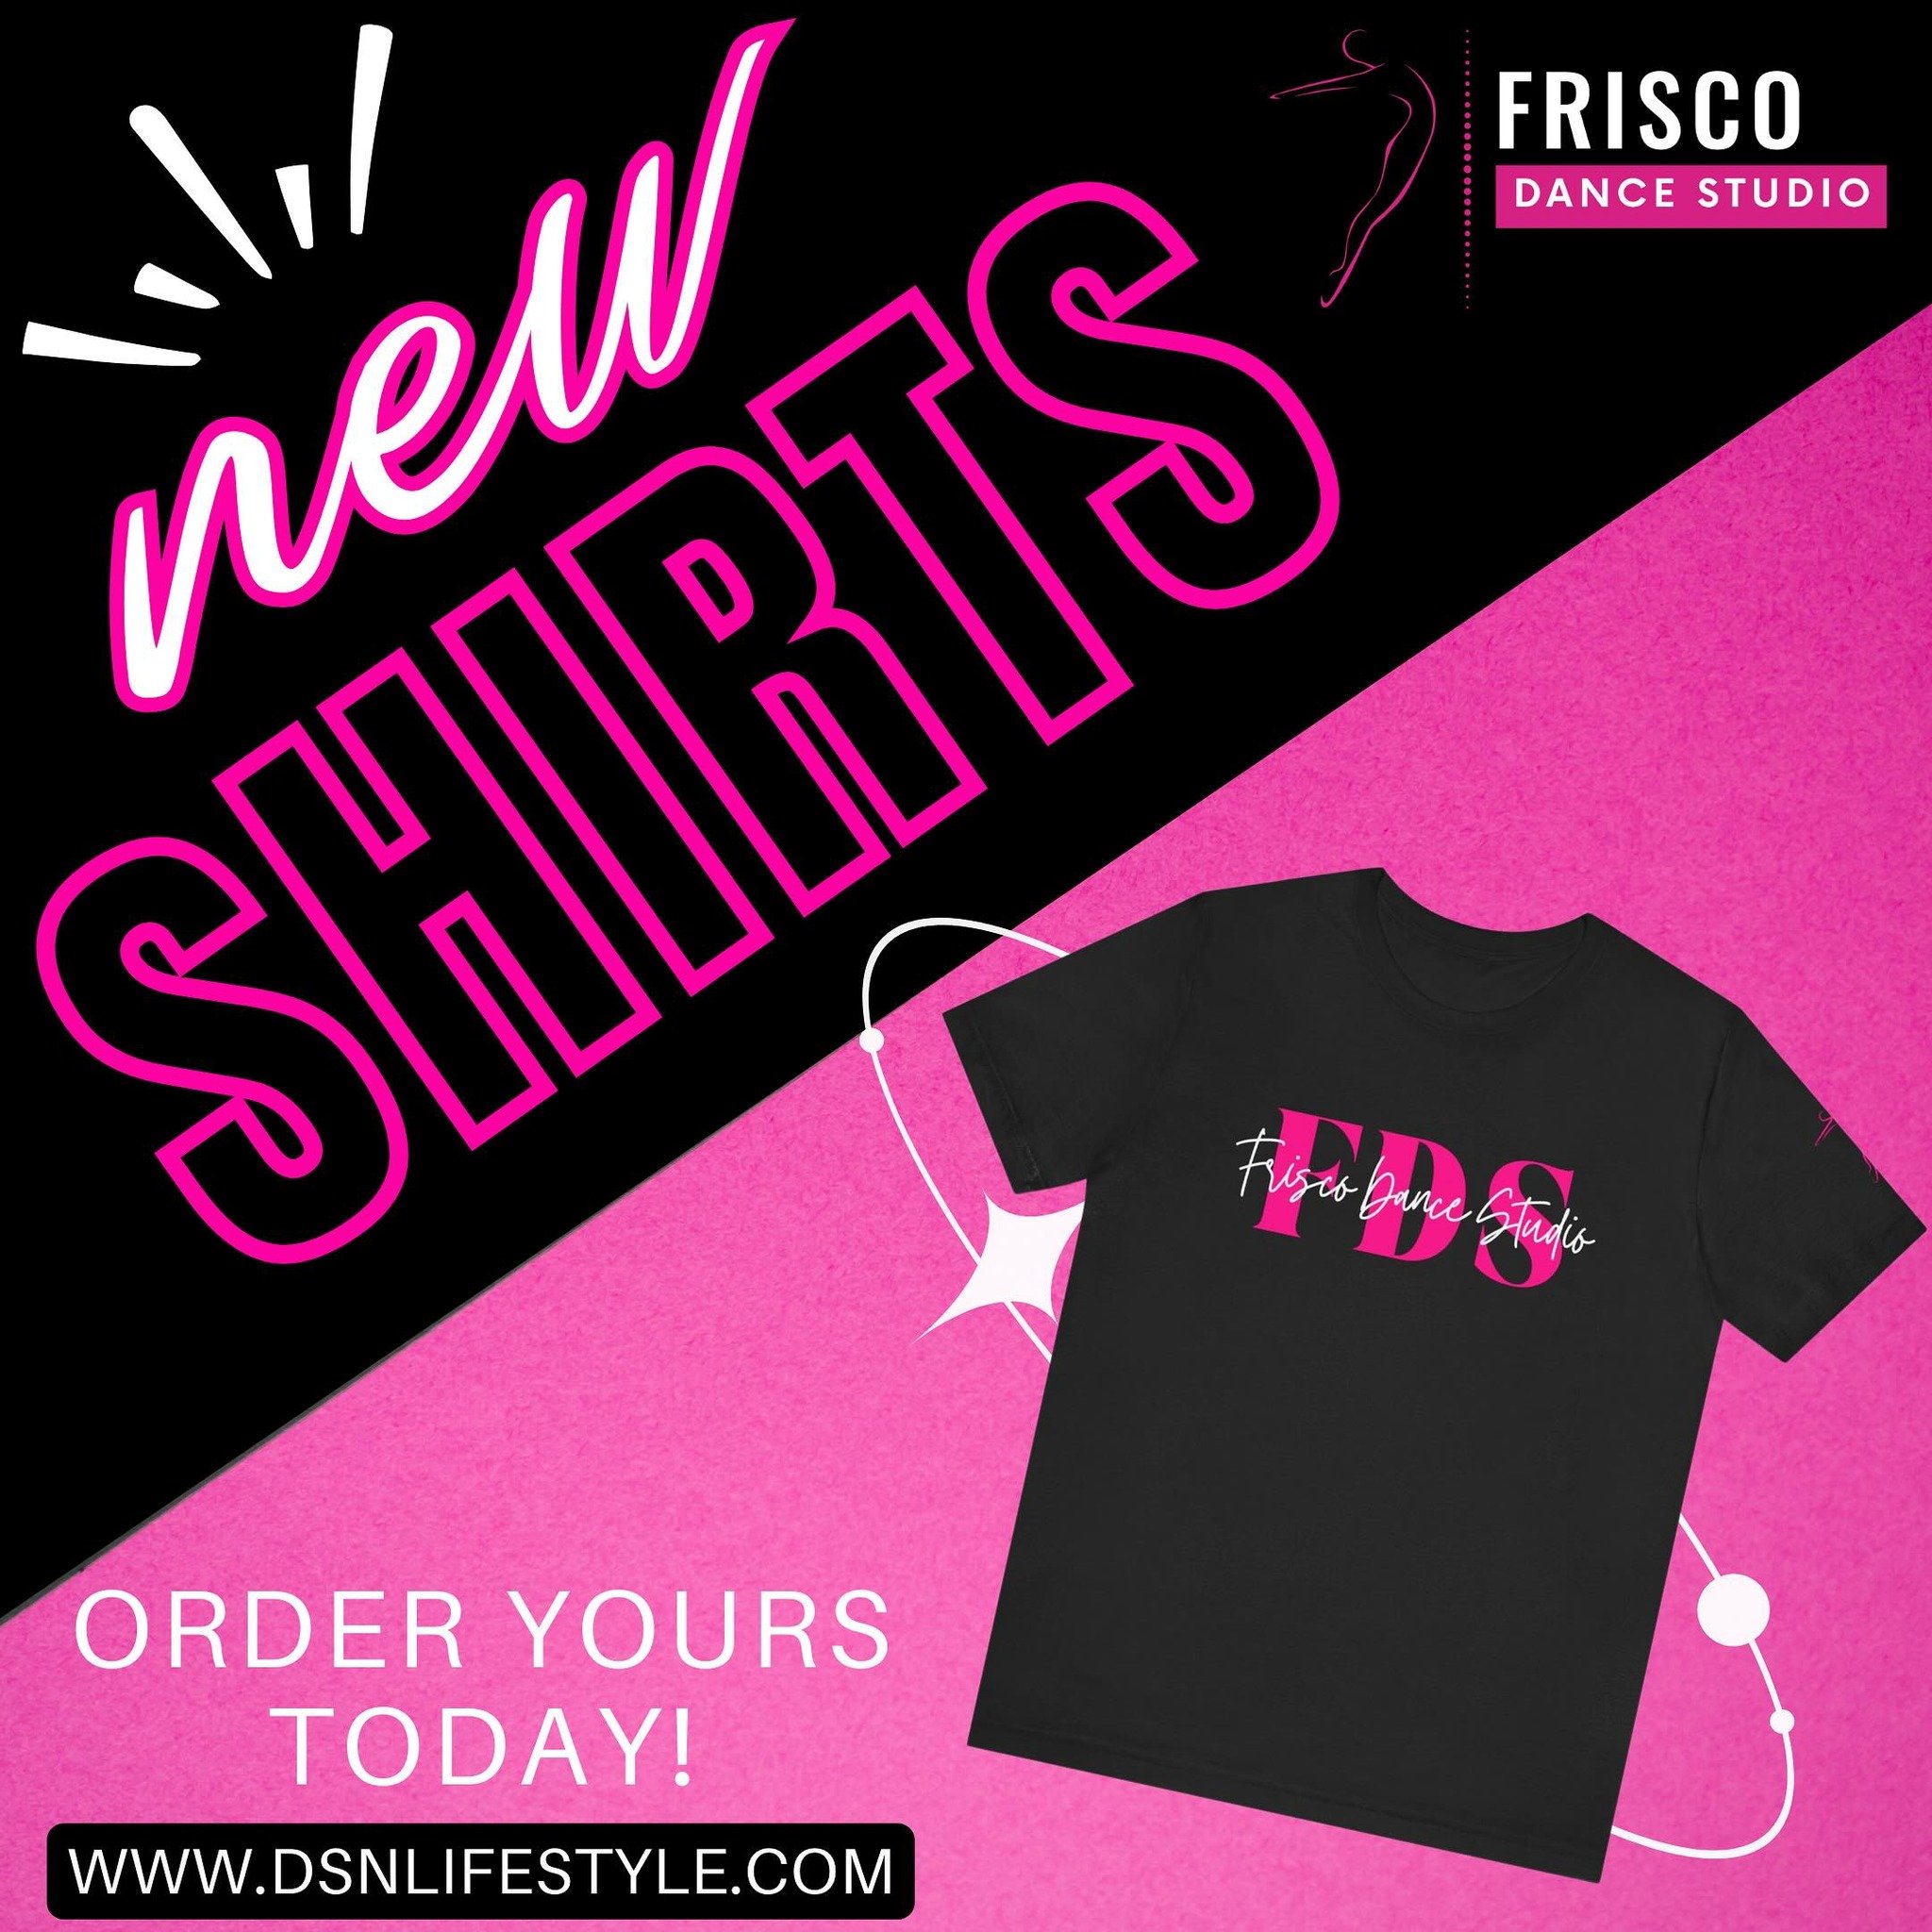 📣 NEW STUDIO TEE 📣 

We just added this fun new studio tee to www.dsnlifestyle.com! Get ready for recital, and stock up on your studio merch today! 💗✨
 
#passionartistrydance #discovertheartistwithin #allendancestudio #mckinneydancestudio #friscod